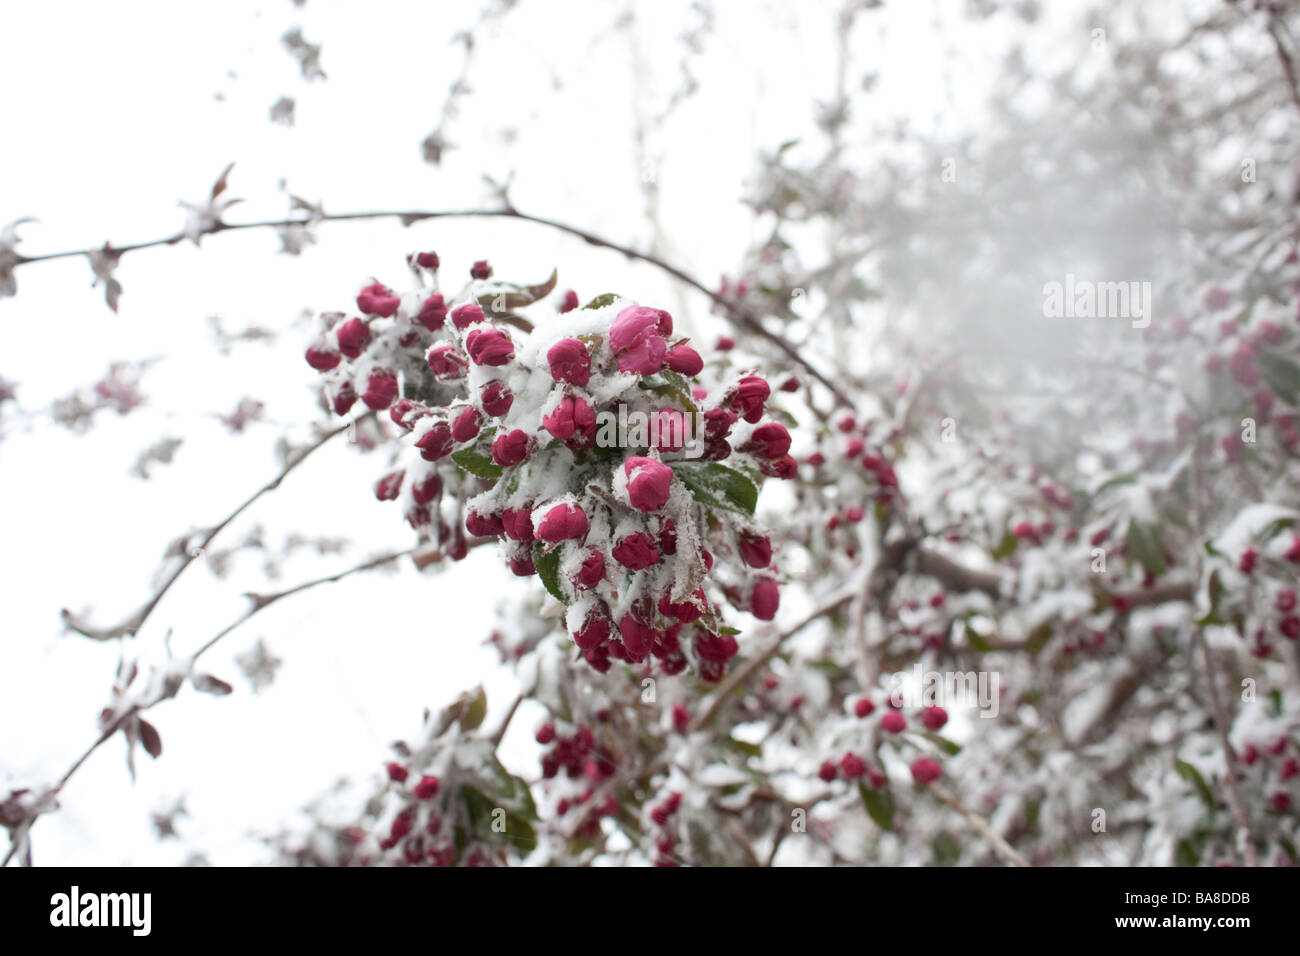 a-closeup-photo-of-crabapple-blossoms-covered-in-snow-BA8DDB.jpg